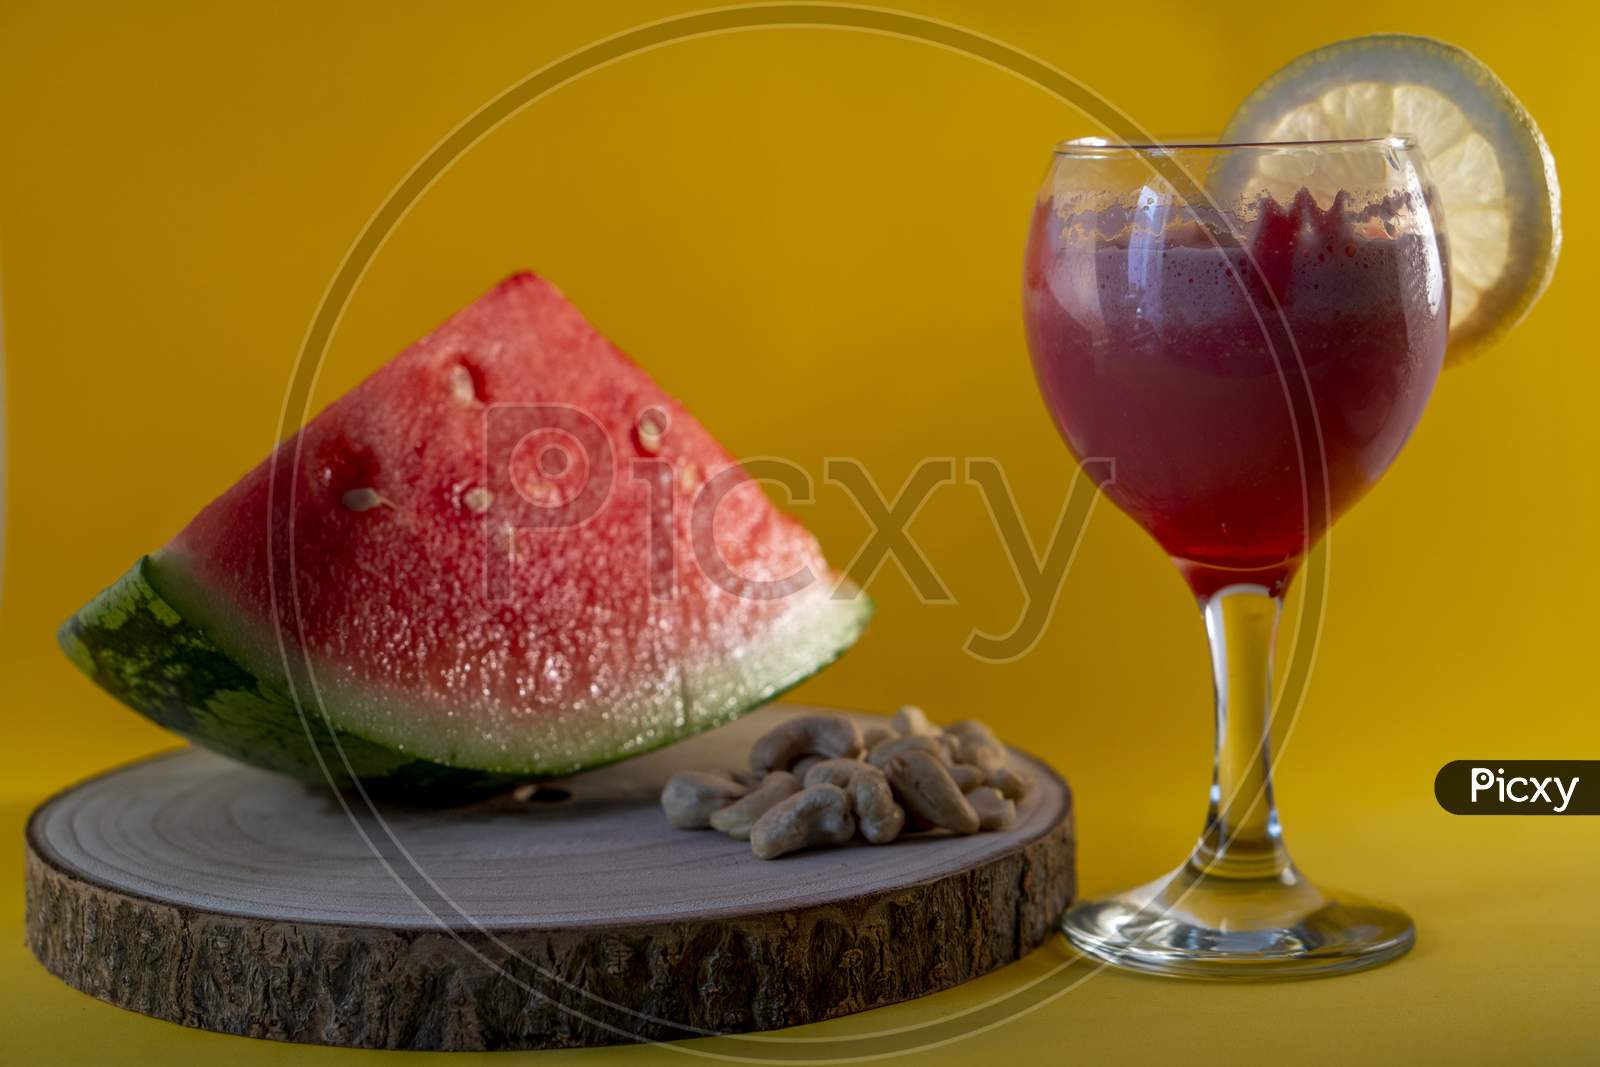 Fresh watermelon juice with a lemon slice, a watermelon piece and Cashew nuts on a yellow background.